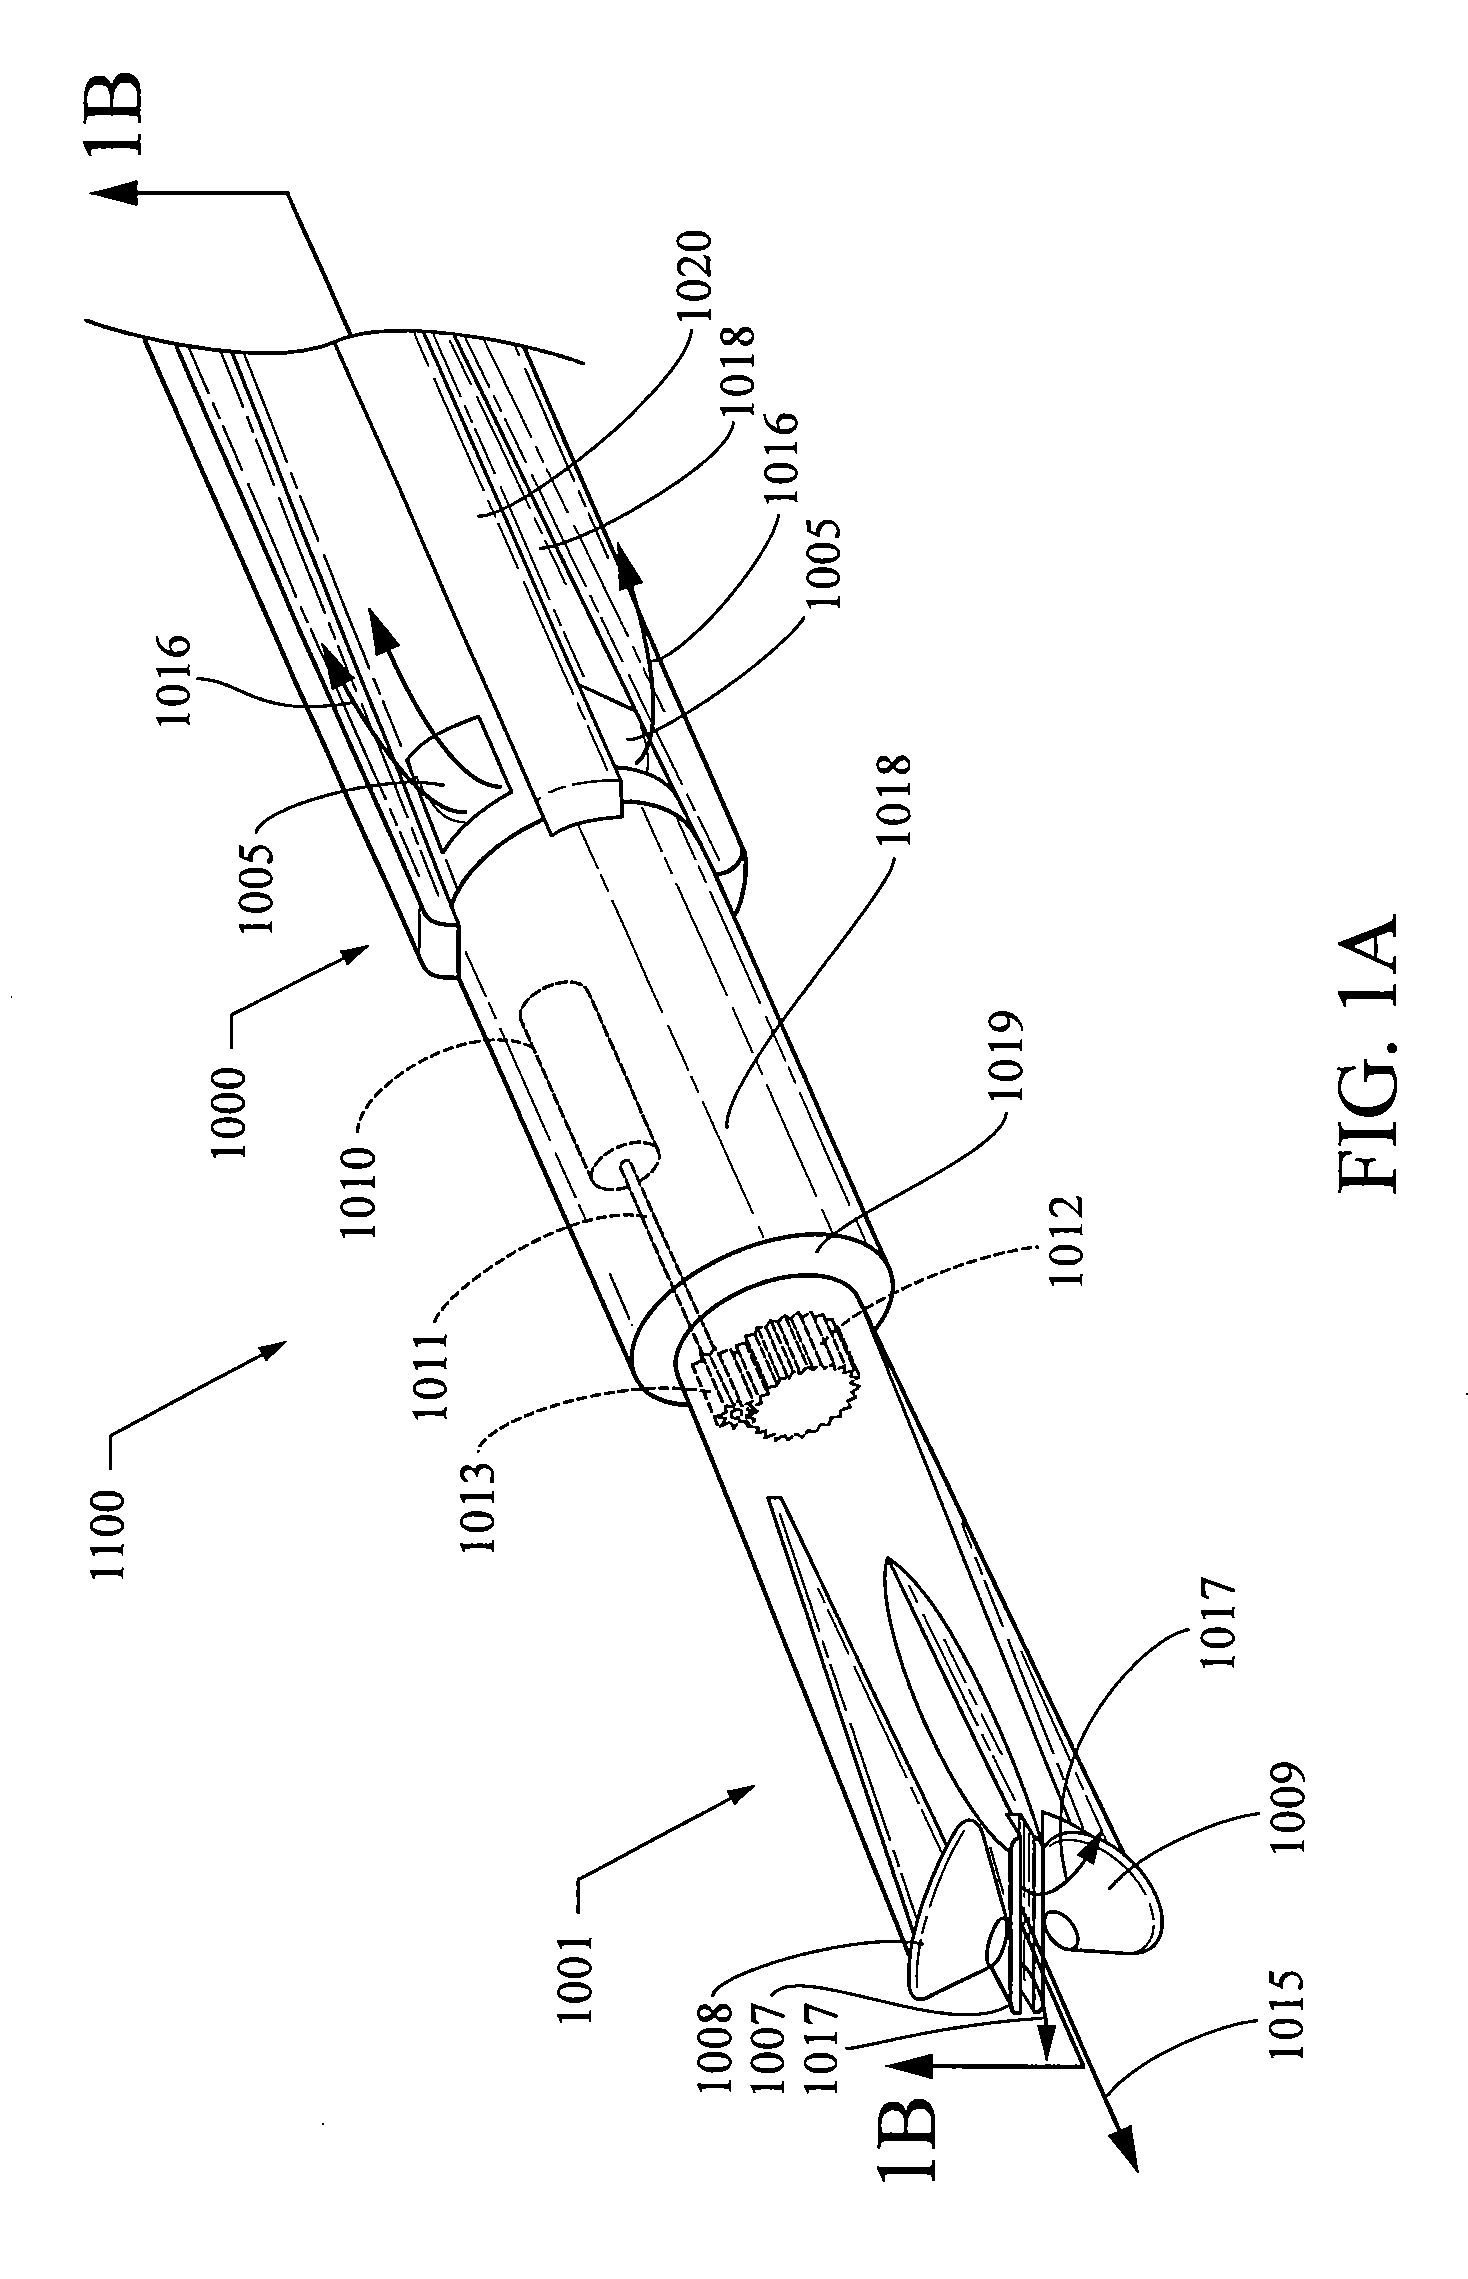 Apparatus for Advancing a Wellbore Using High Power Laser Energy